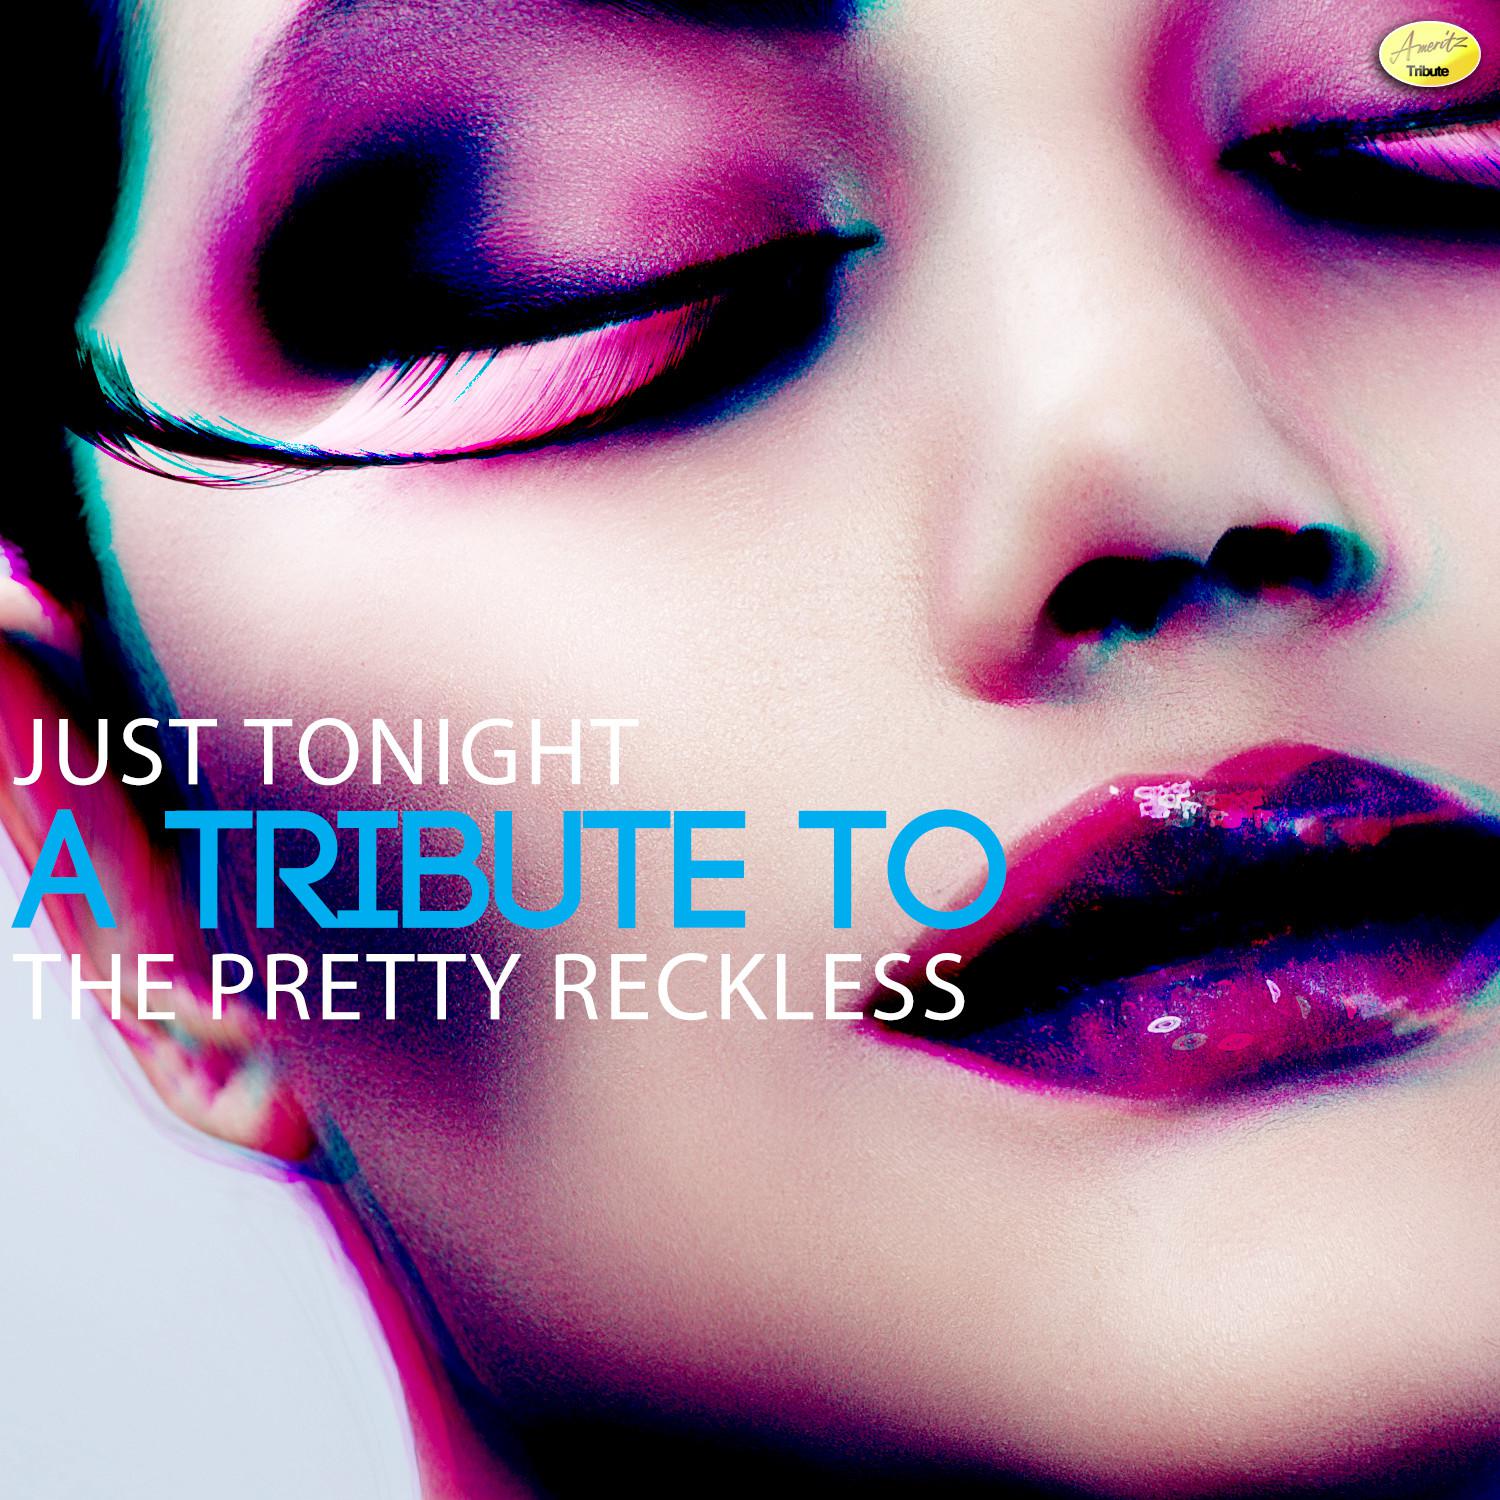 Just Tonight - A Tribute to the Pretty Reckless - Single